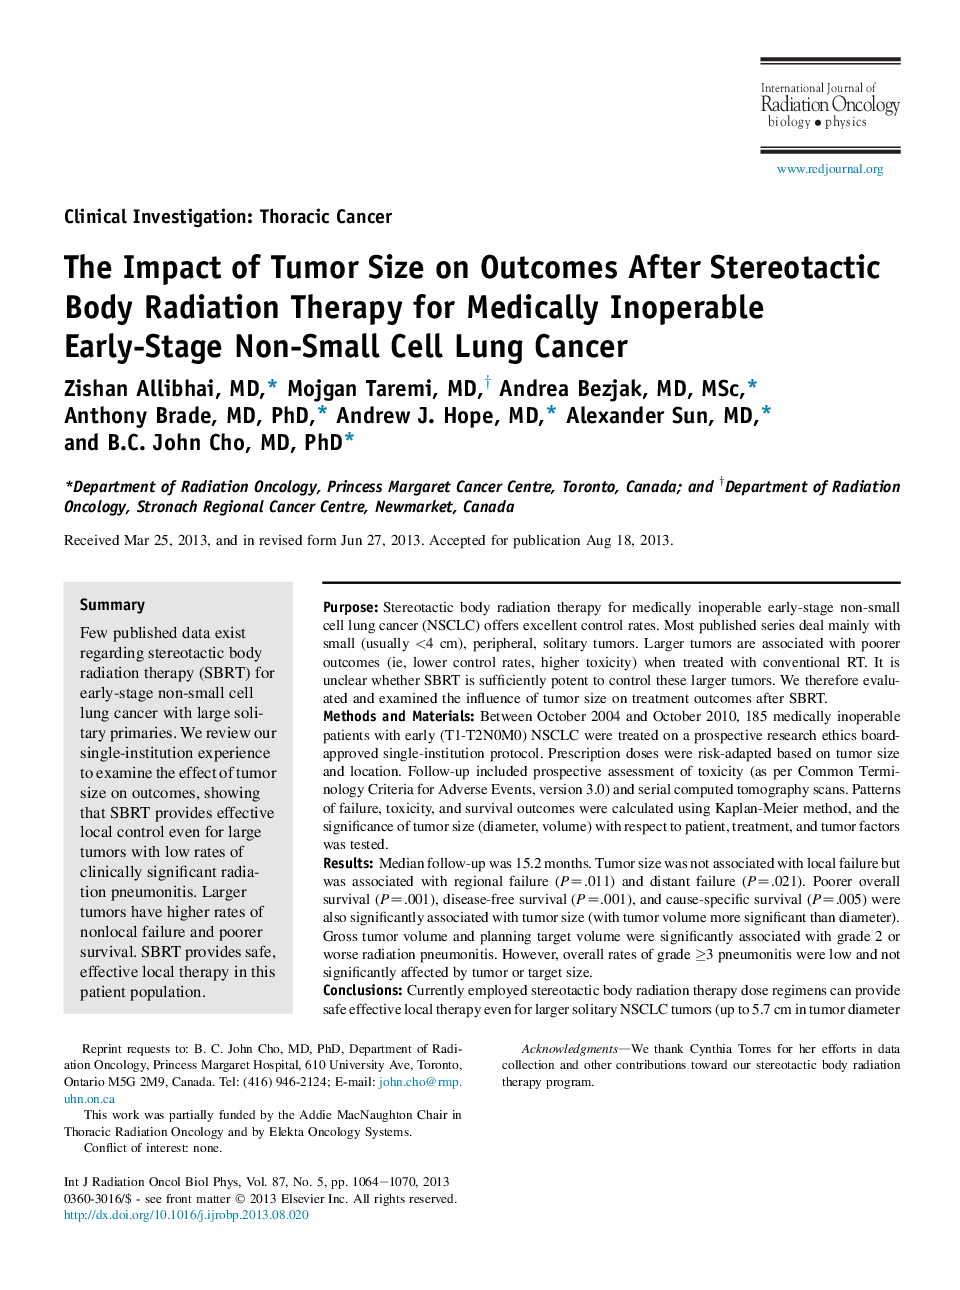 The Impact of Tumor Size on Outcomes After Stereotactic Body Radiation Therapy for Medically Inoperable Early-Stage Non-Small Cell Lung Cancer